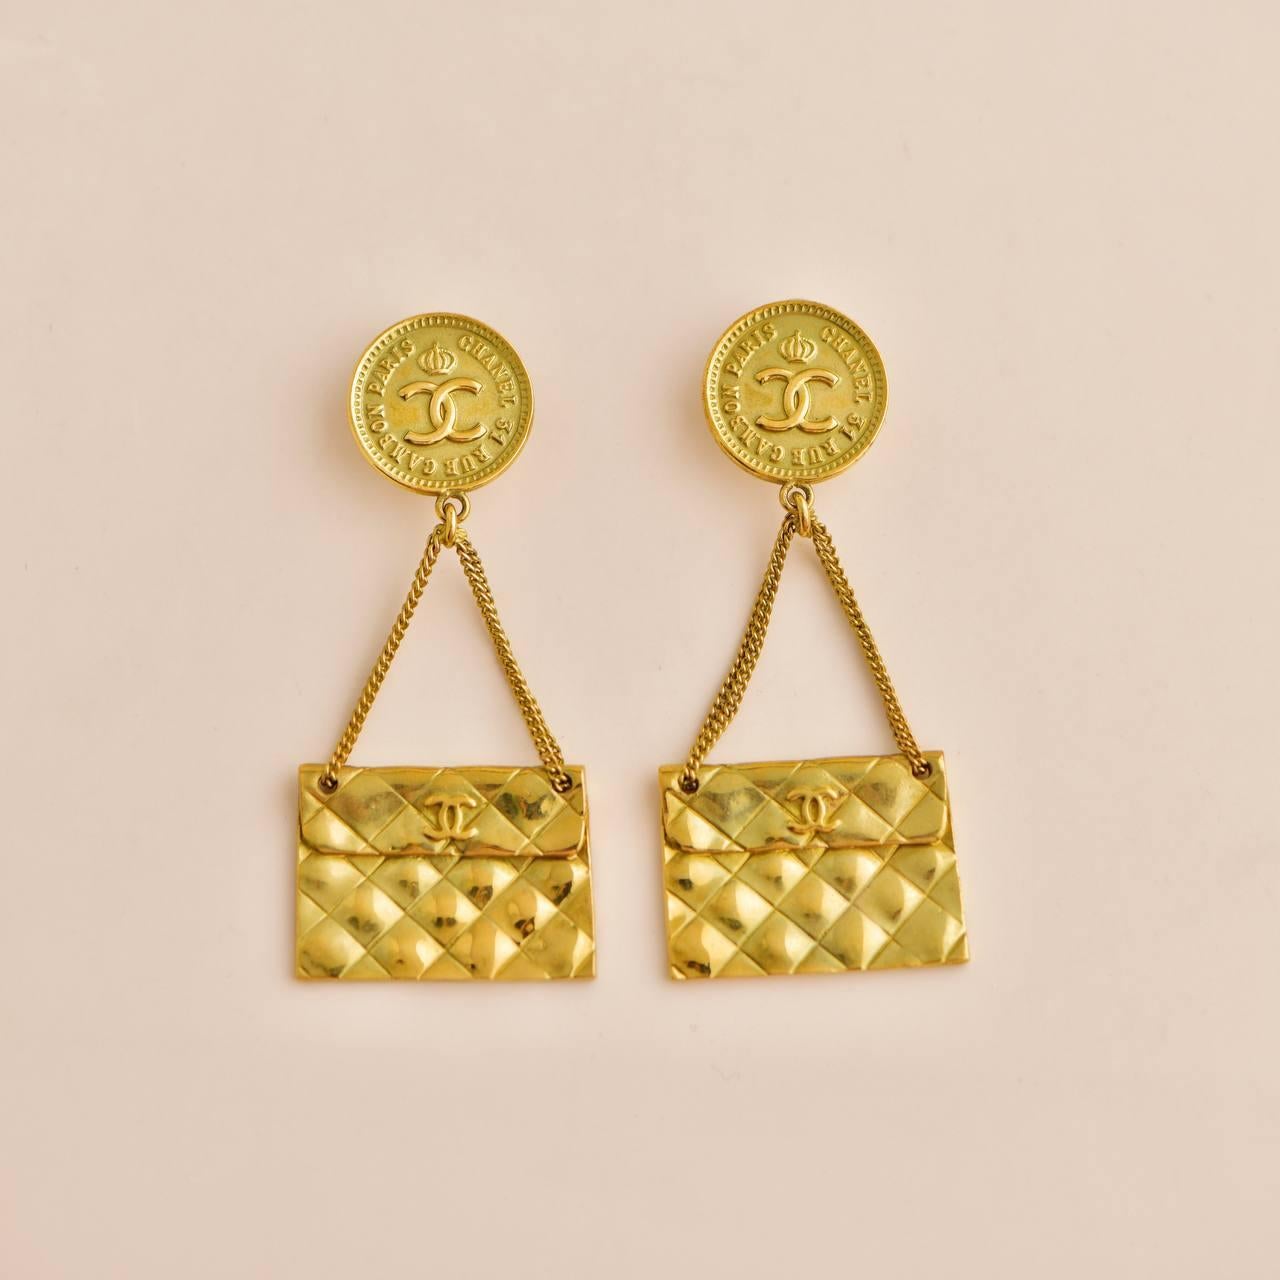 Chanel CC Coin Quilted Flap Bag Drop Earrings For Sale 4